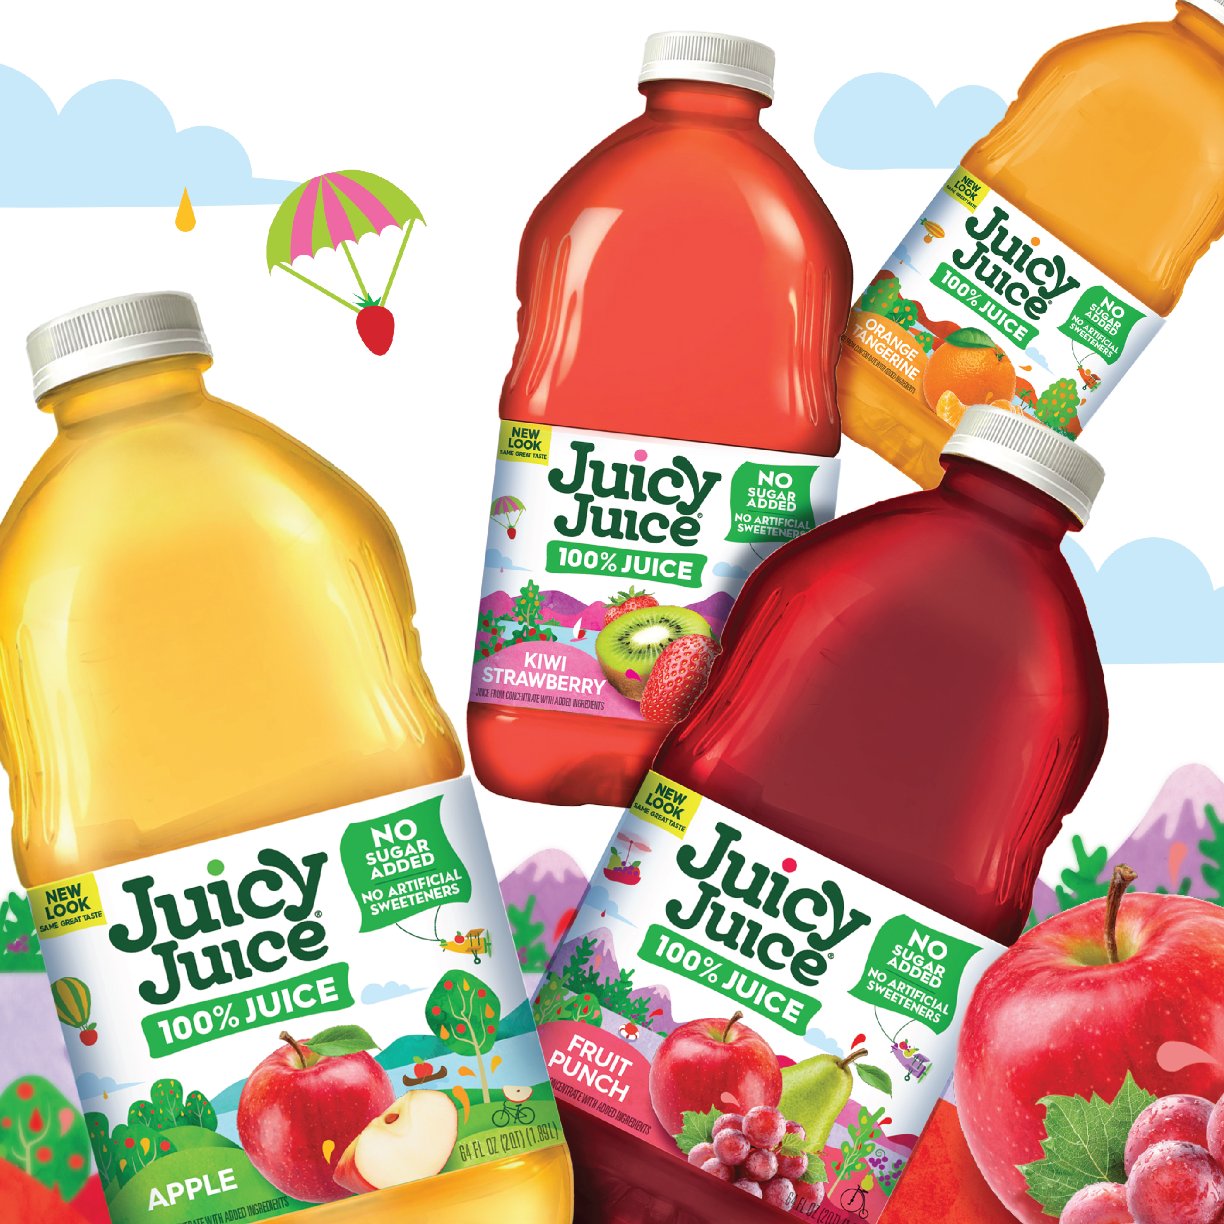 Juicy Juice Imagines a Vibrant World for Kids with Their Charming New Look